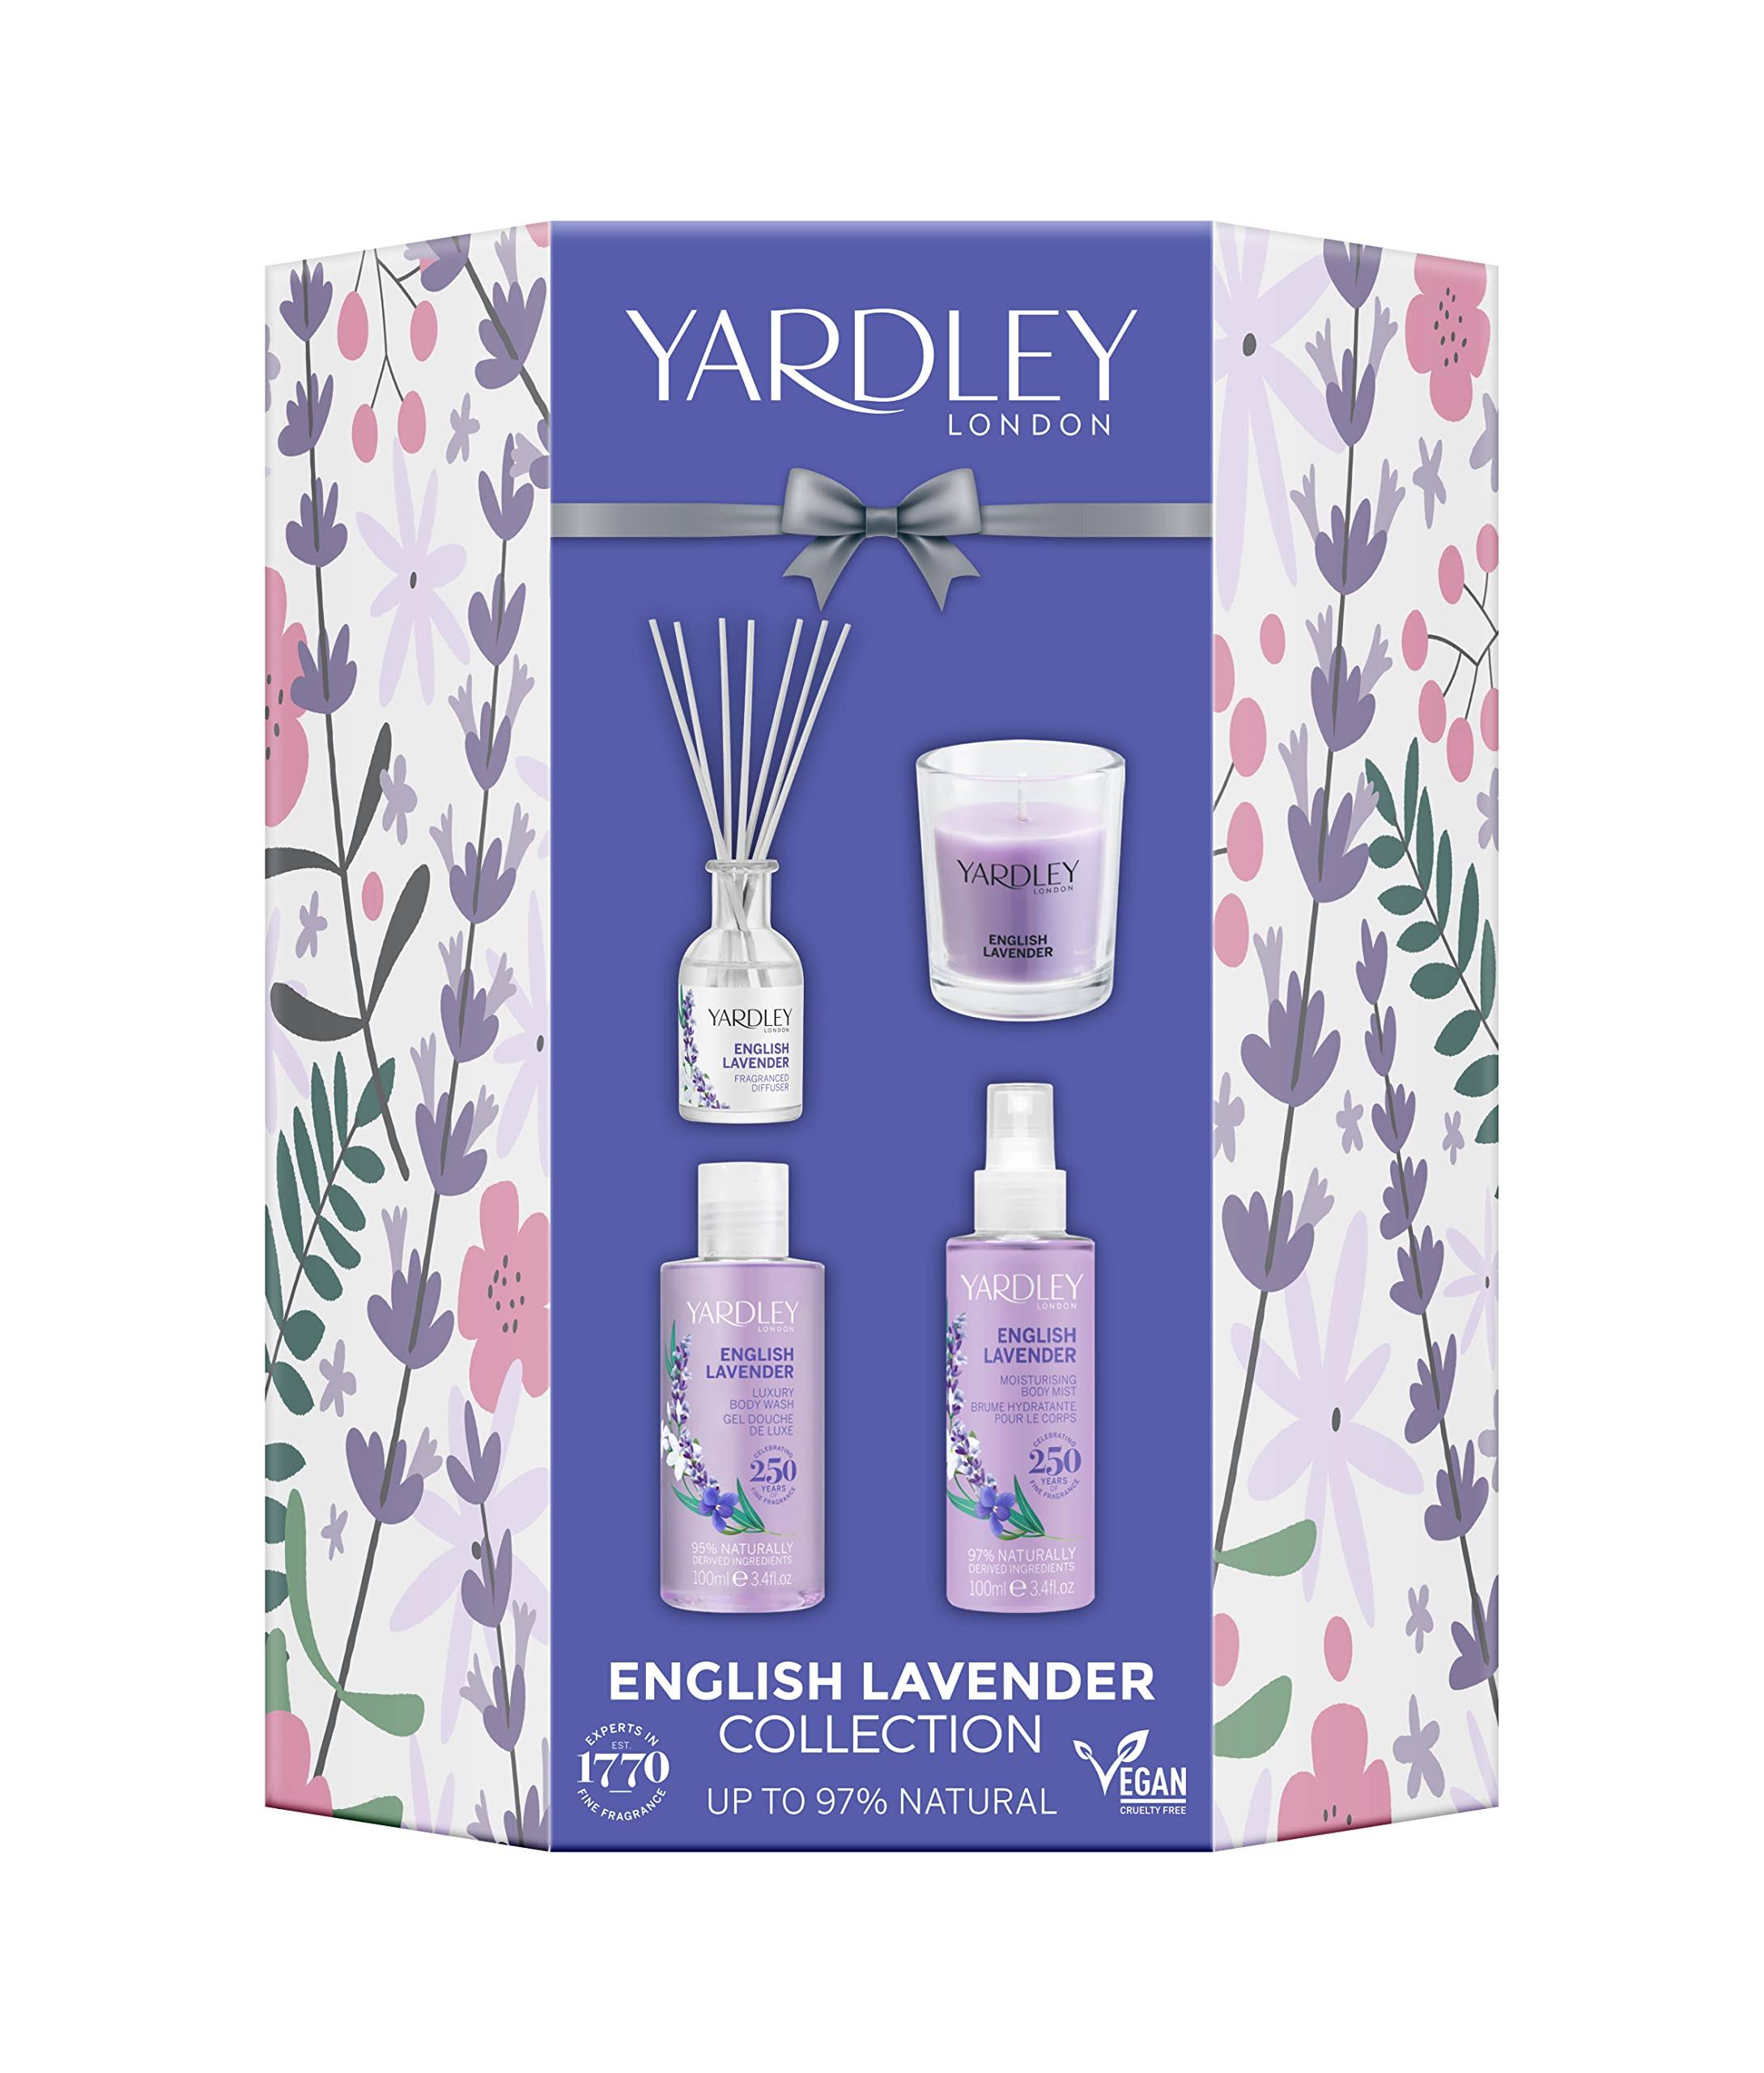 Yardley English Lavender Body & Home Collection Gift Set